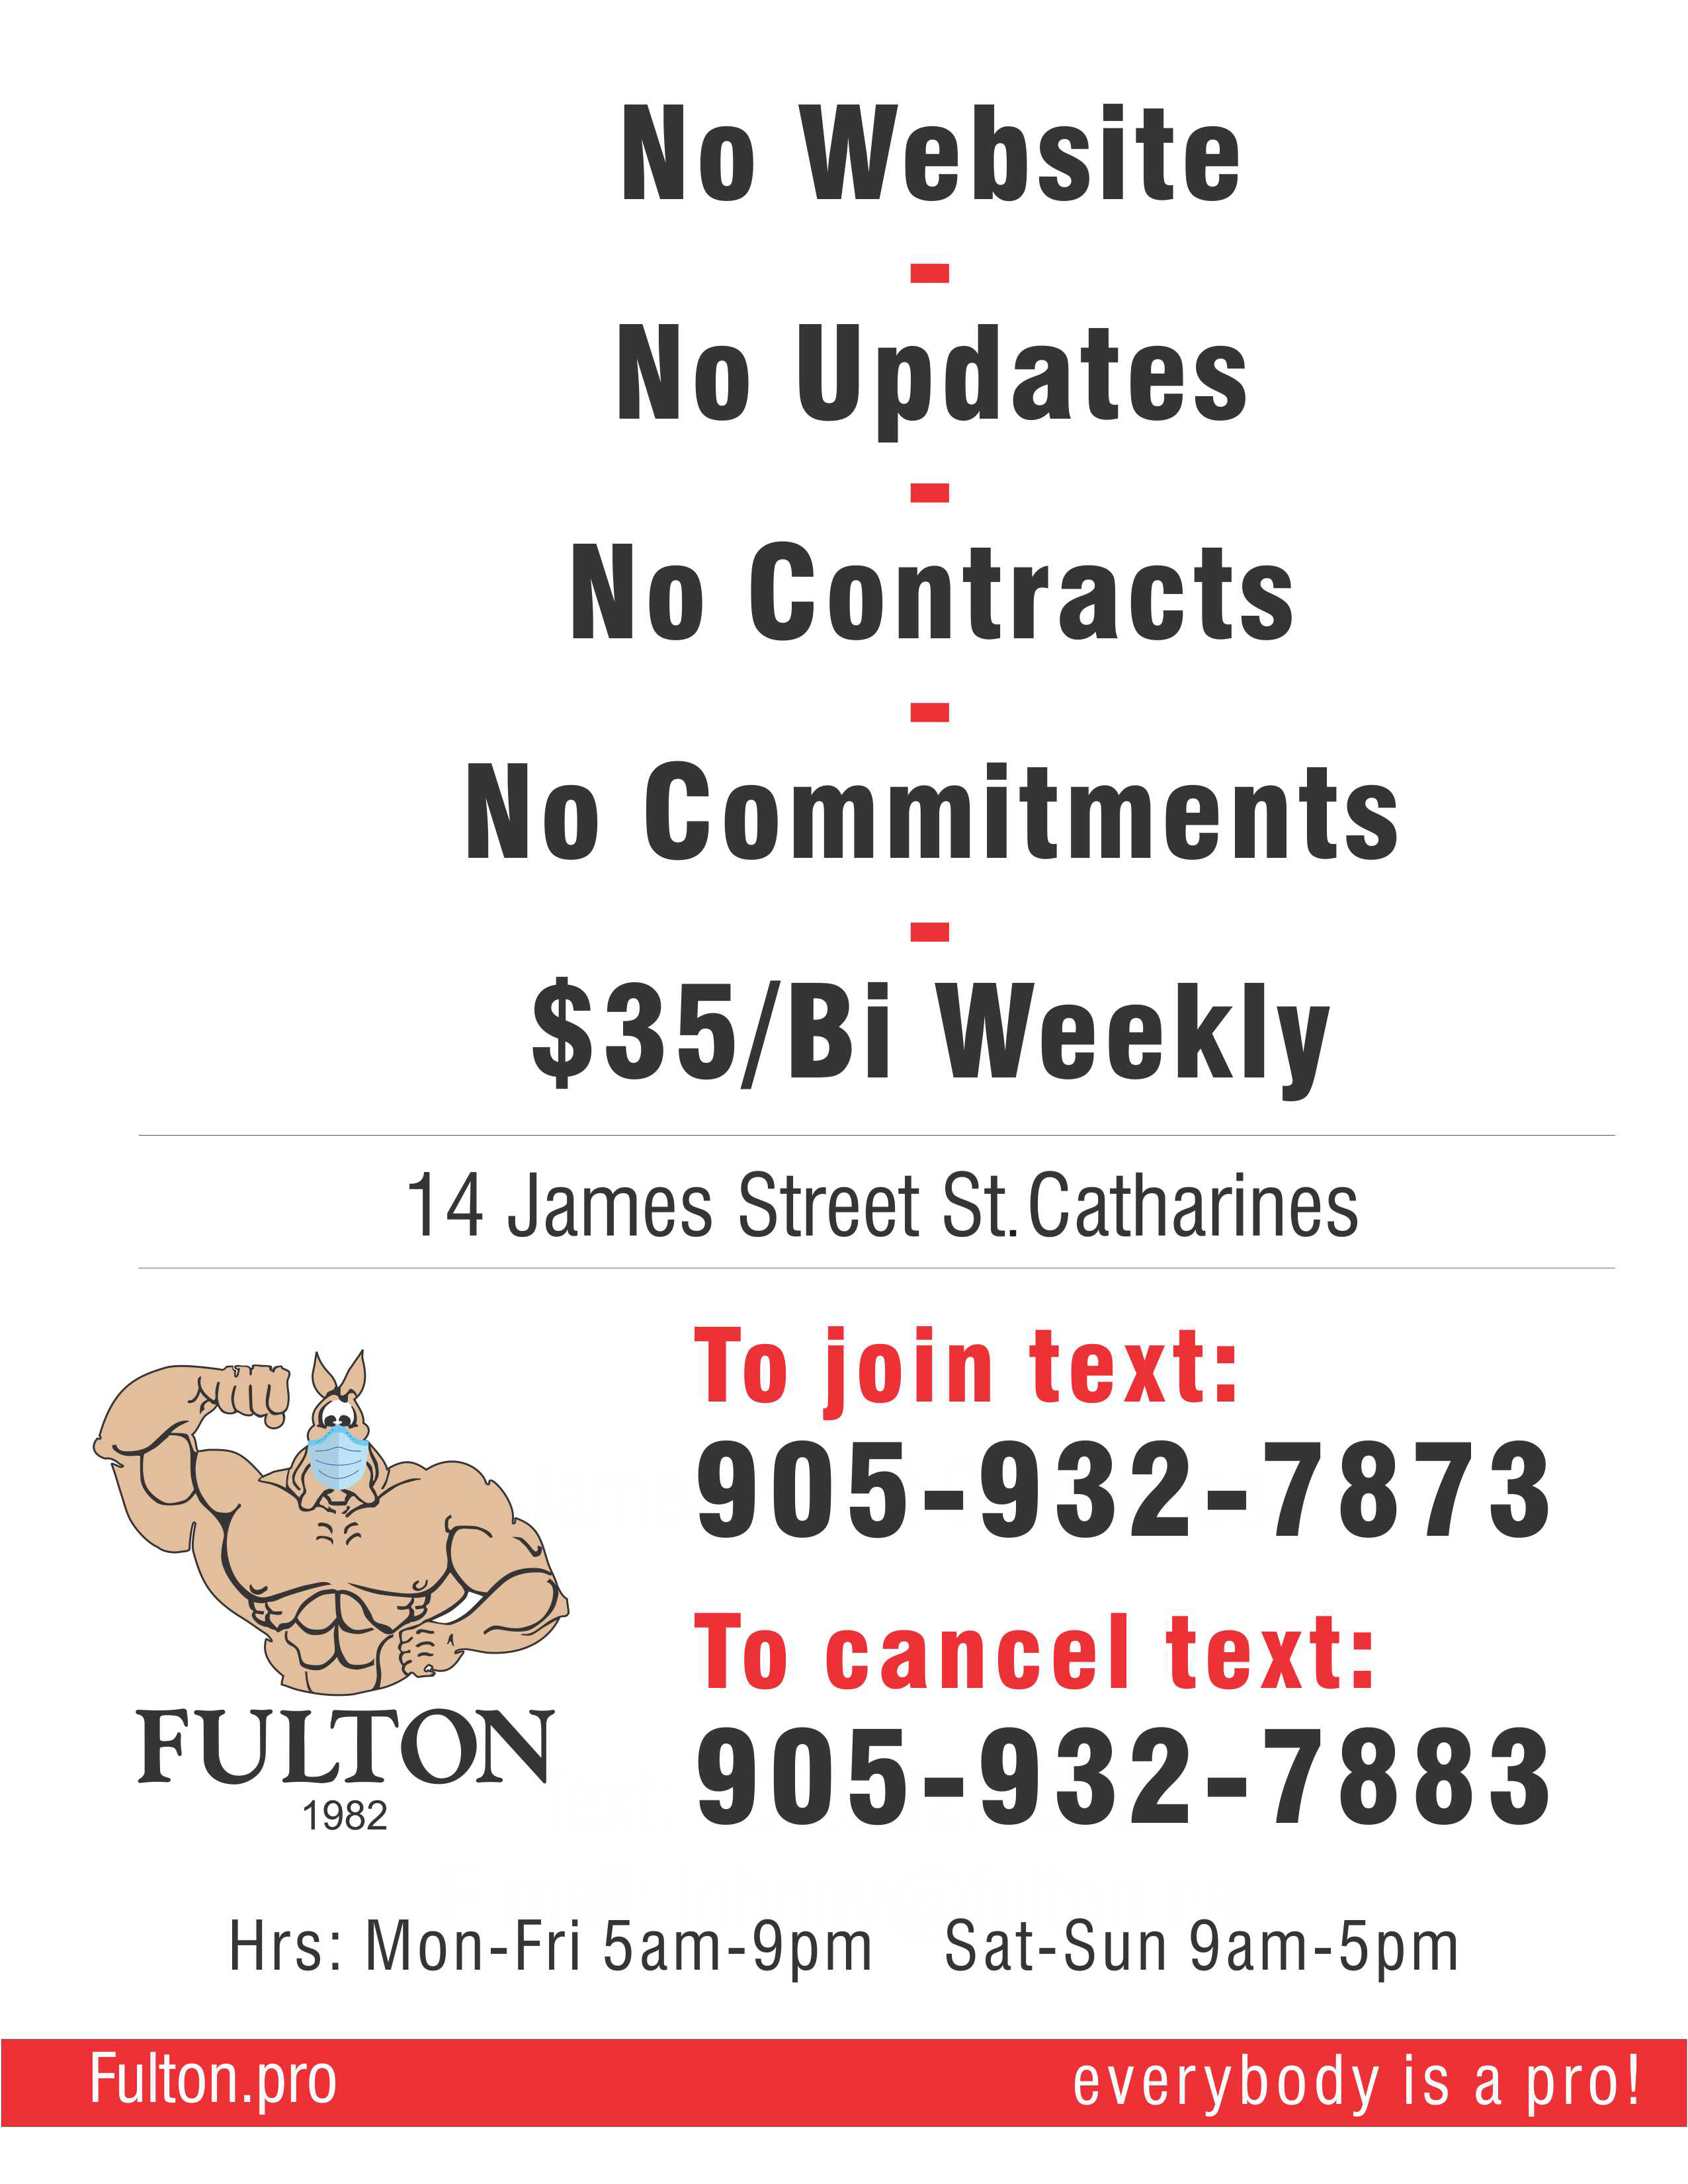 No website - No updates - No Contracts - No Commitments $35/Bi Weekly
 14 James Street St. Catharines Hrs: Mon - Fri 5am - 9pm Sat - Sun 9am - 5pm Fulton.Pro Everybody is a pro